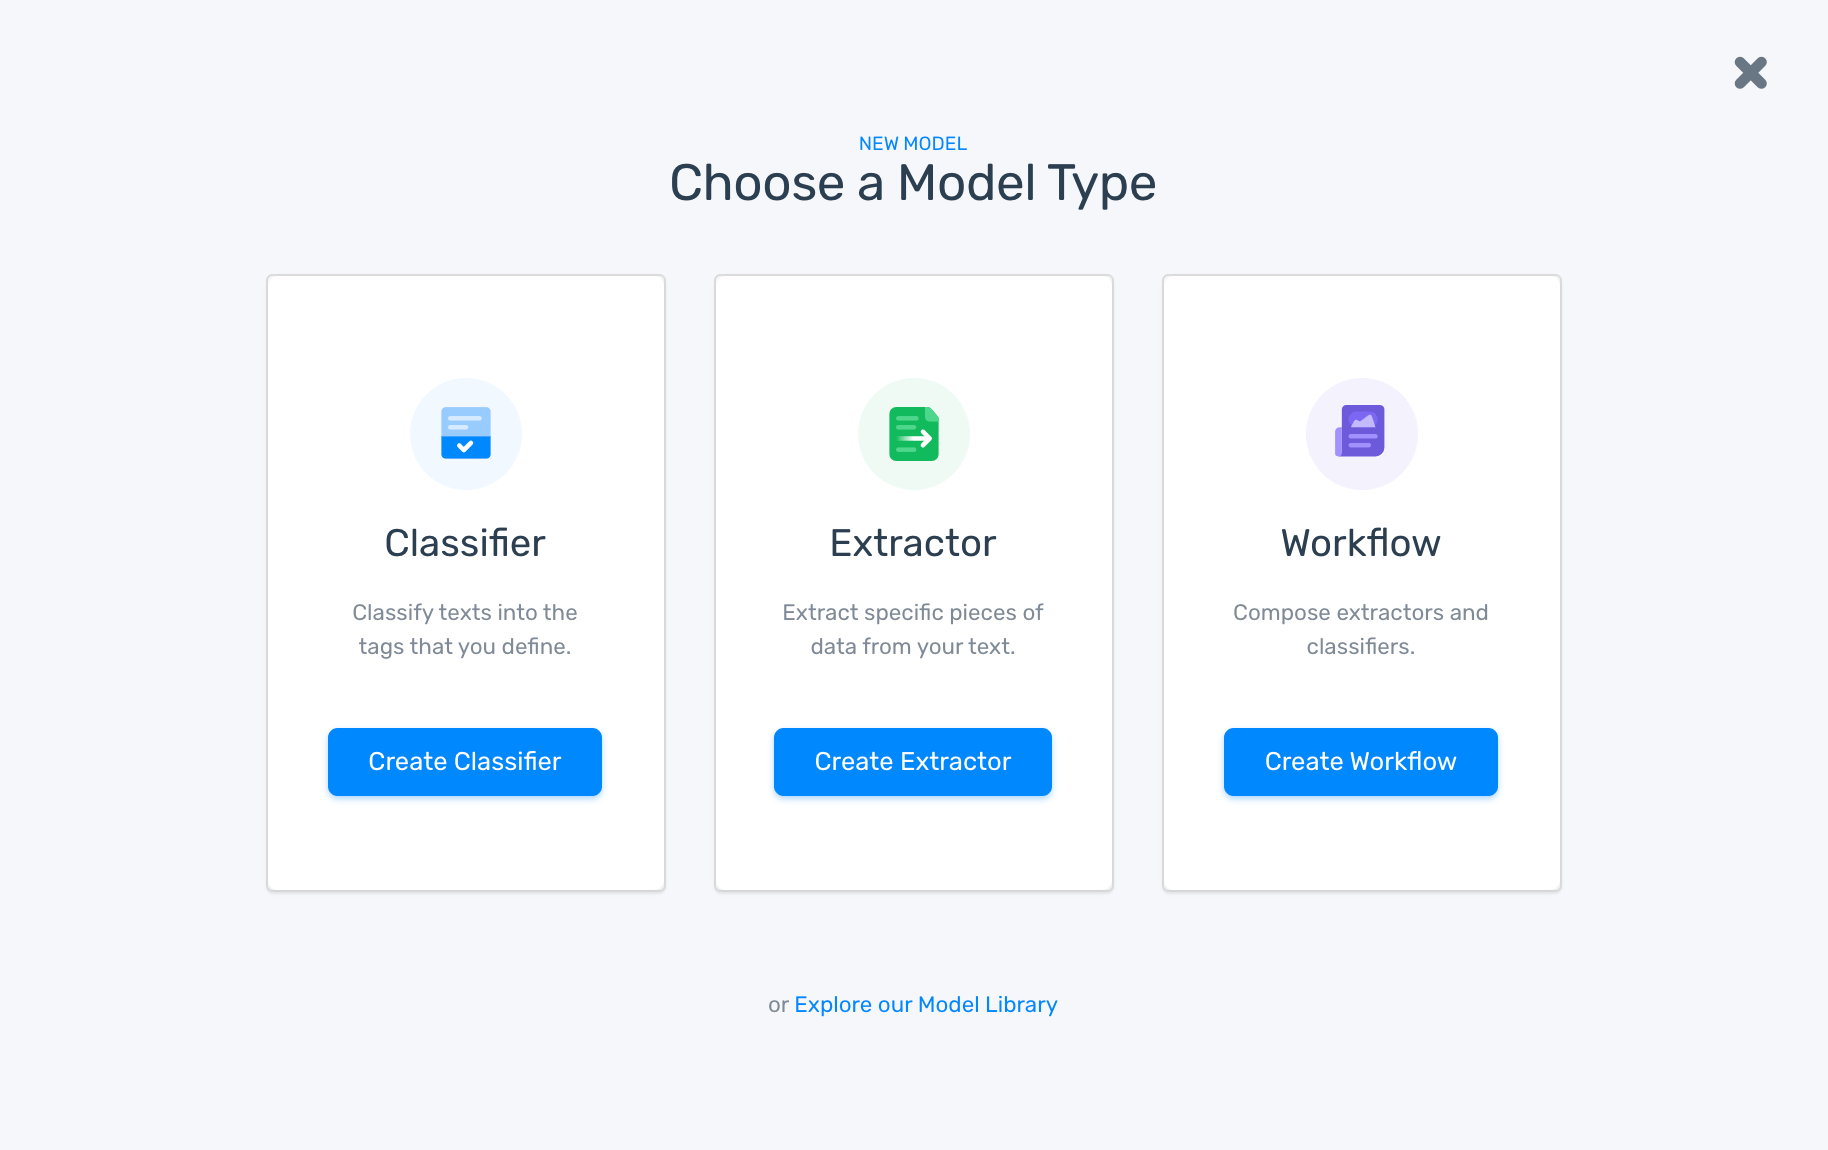 MonkeyLEarn's model builder showing two types of model: classfier and extractor